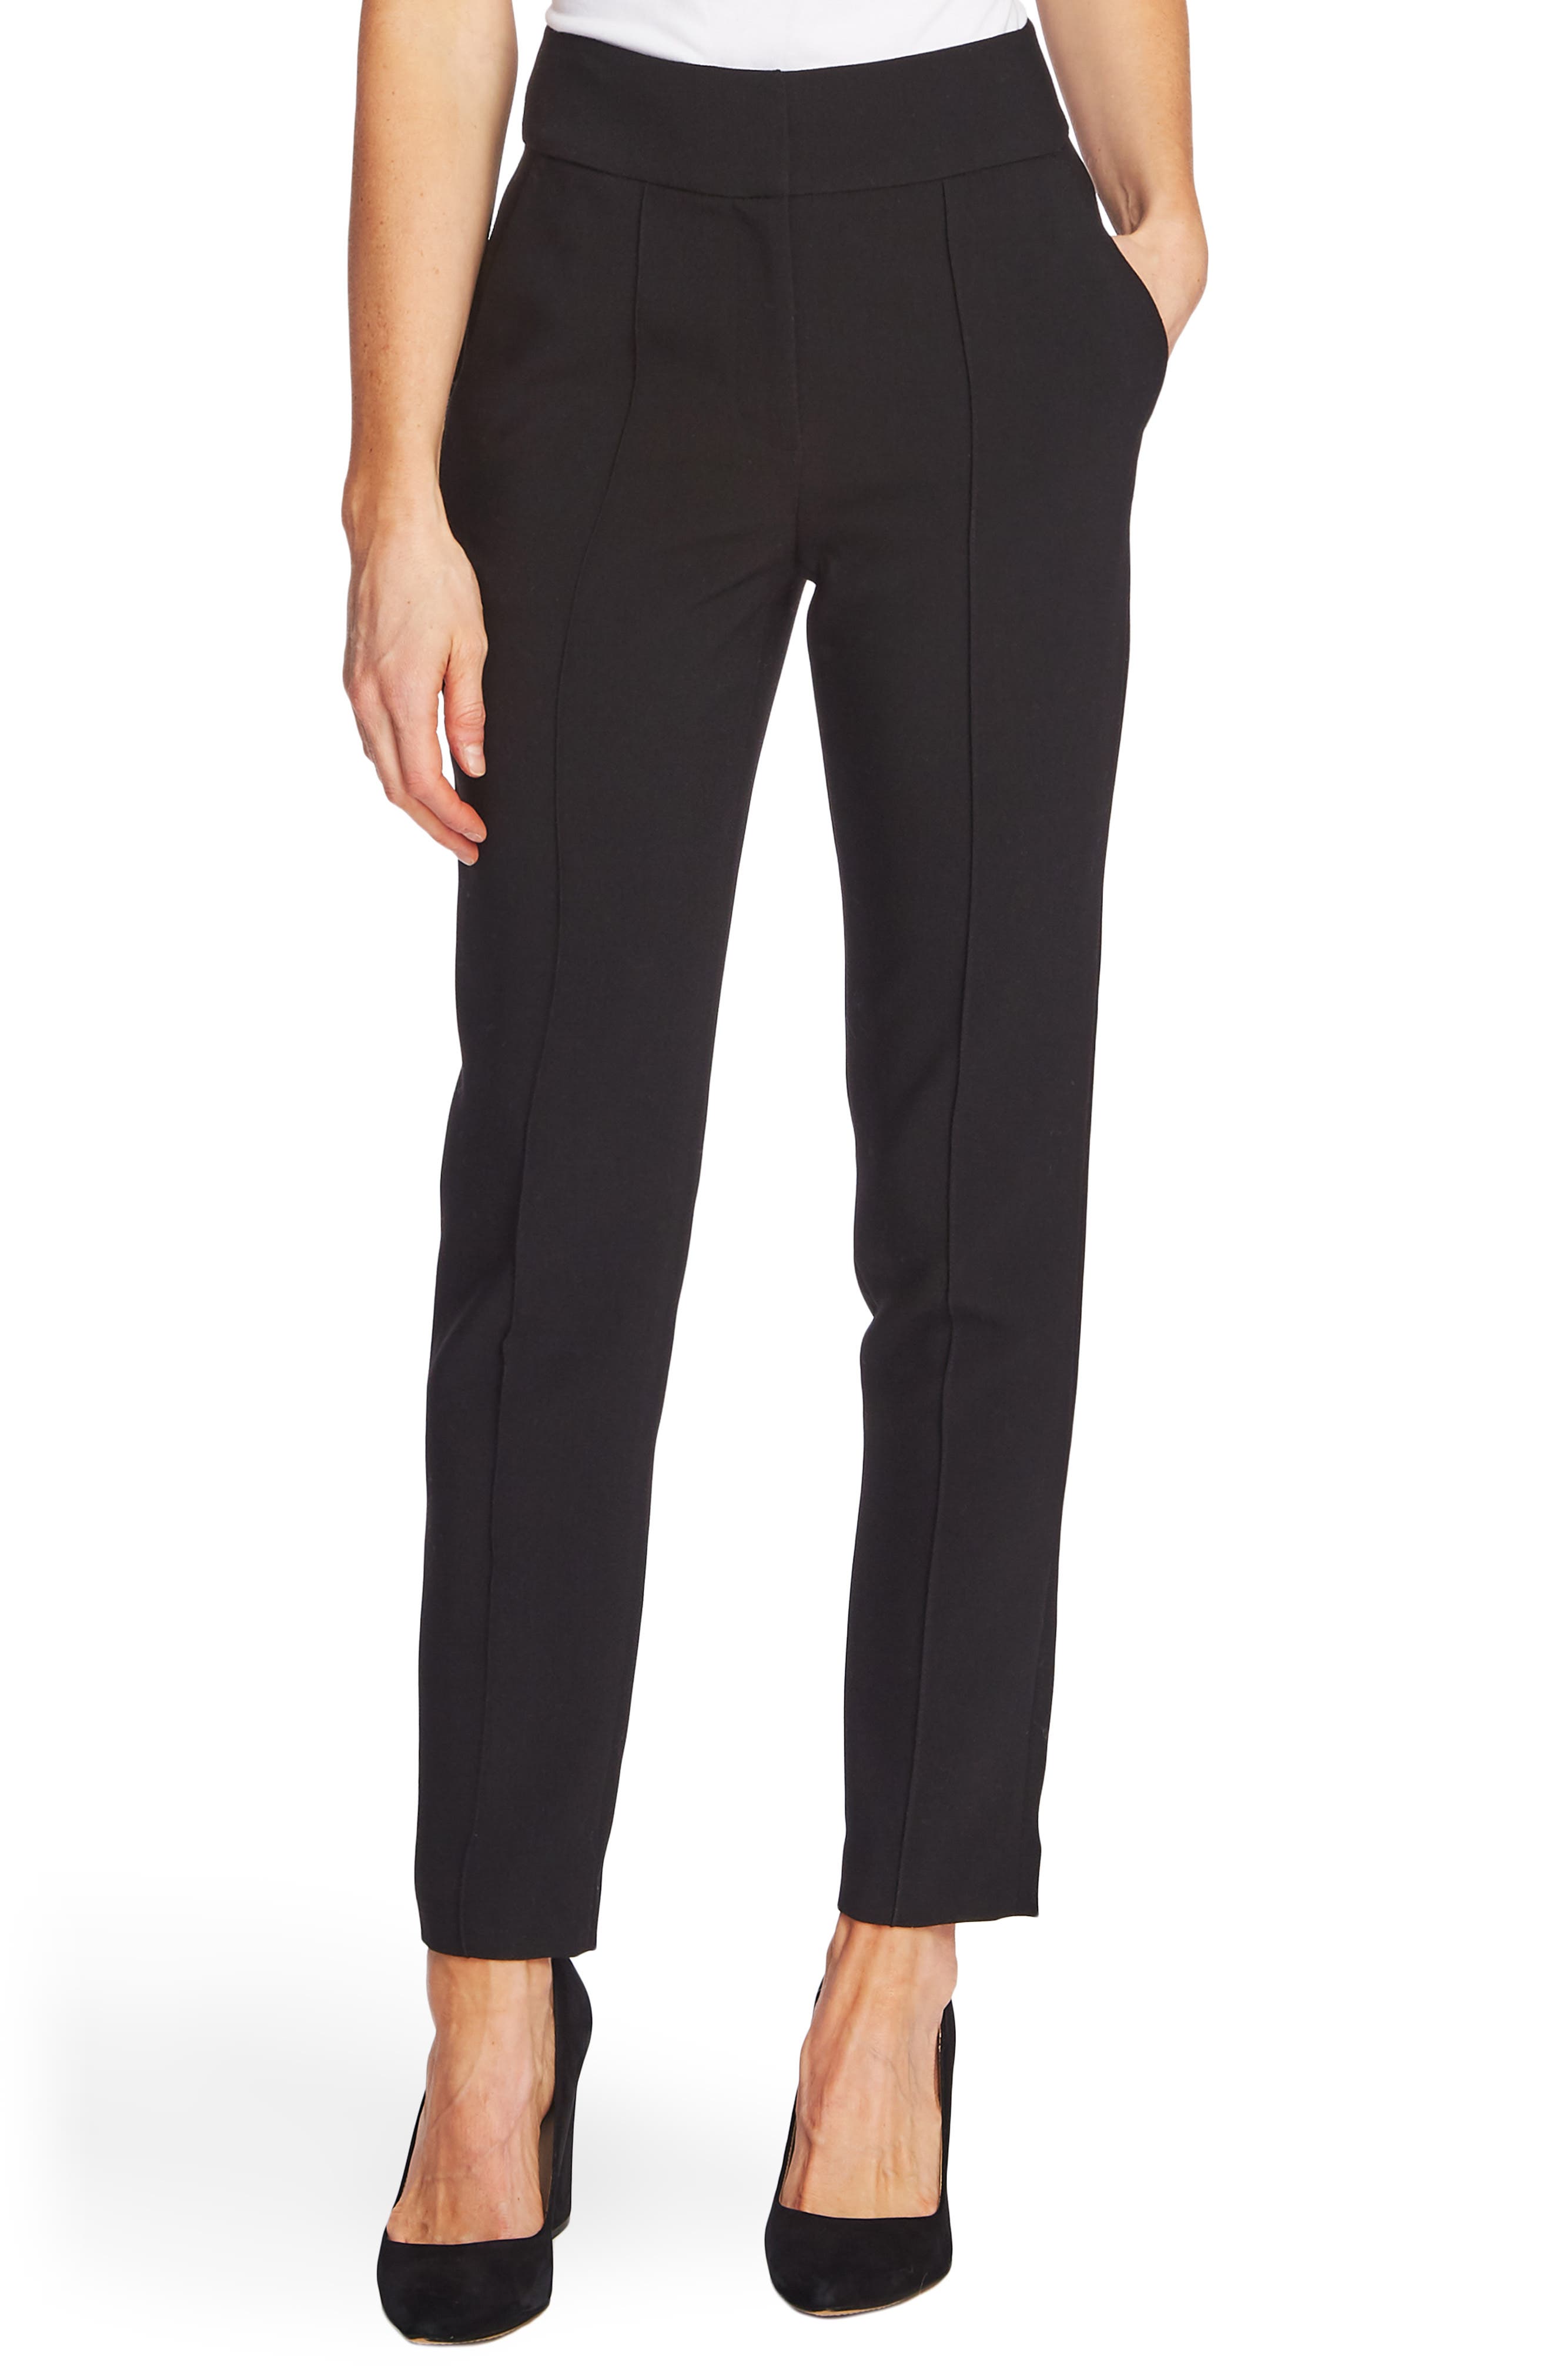 Womens High Waisted Capri Pants Formal Office Work Cropped Trousers Pants